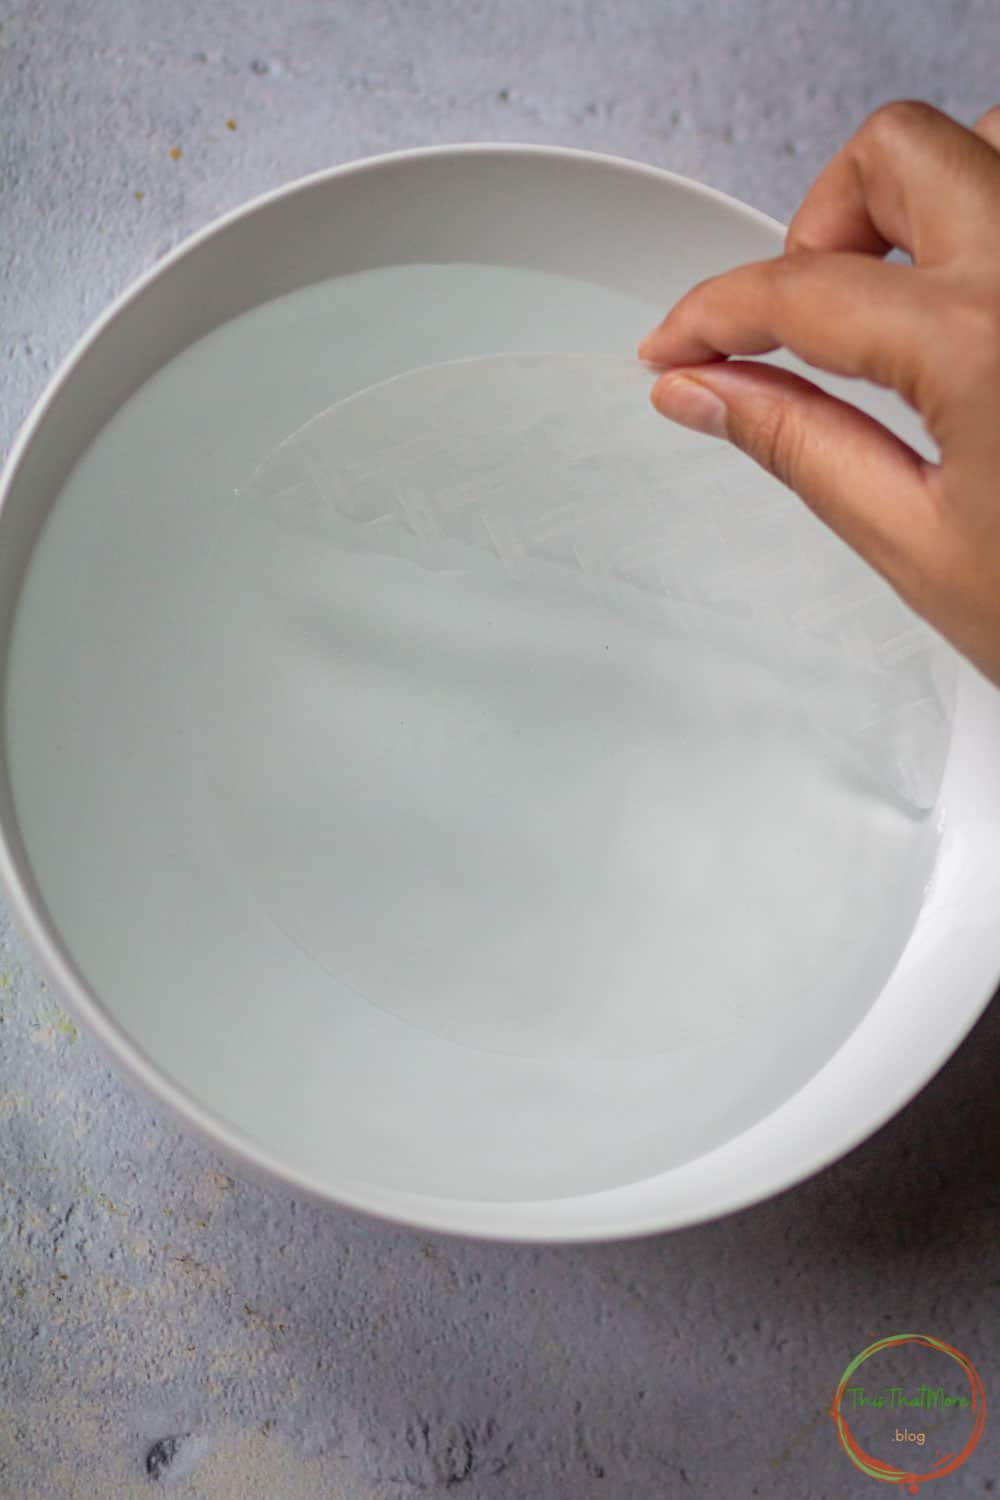 Dip the rice paper wrapper in the warm water.